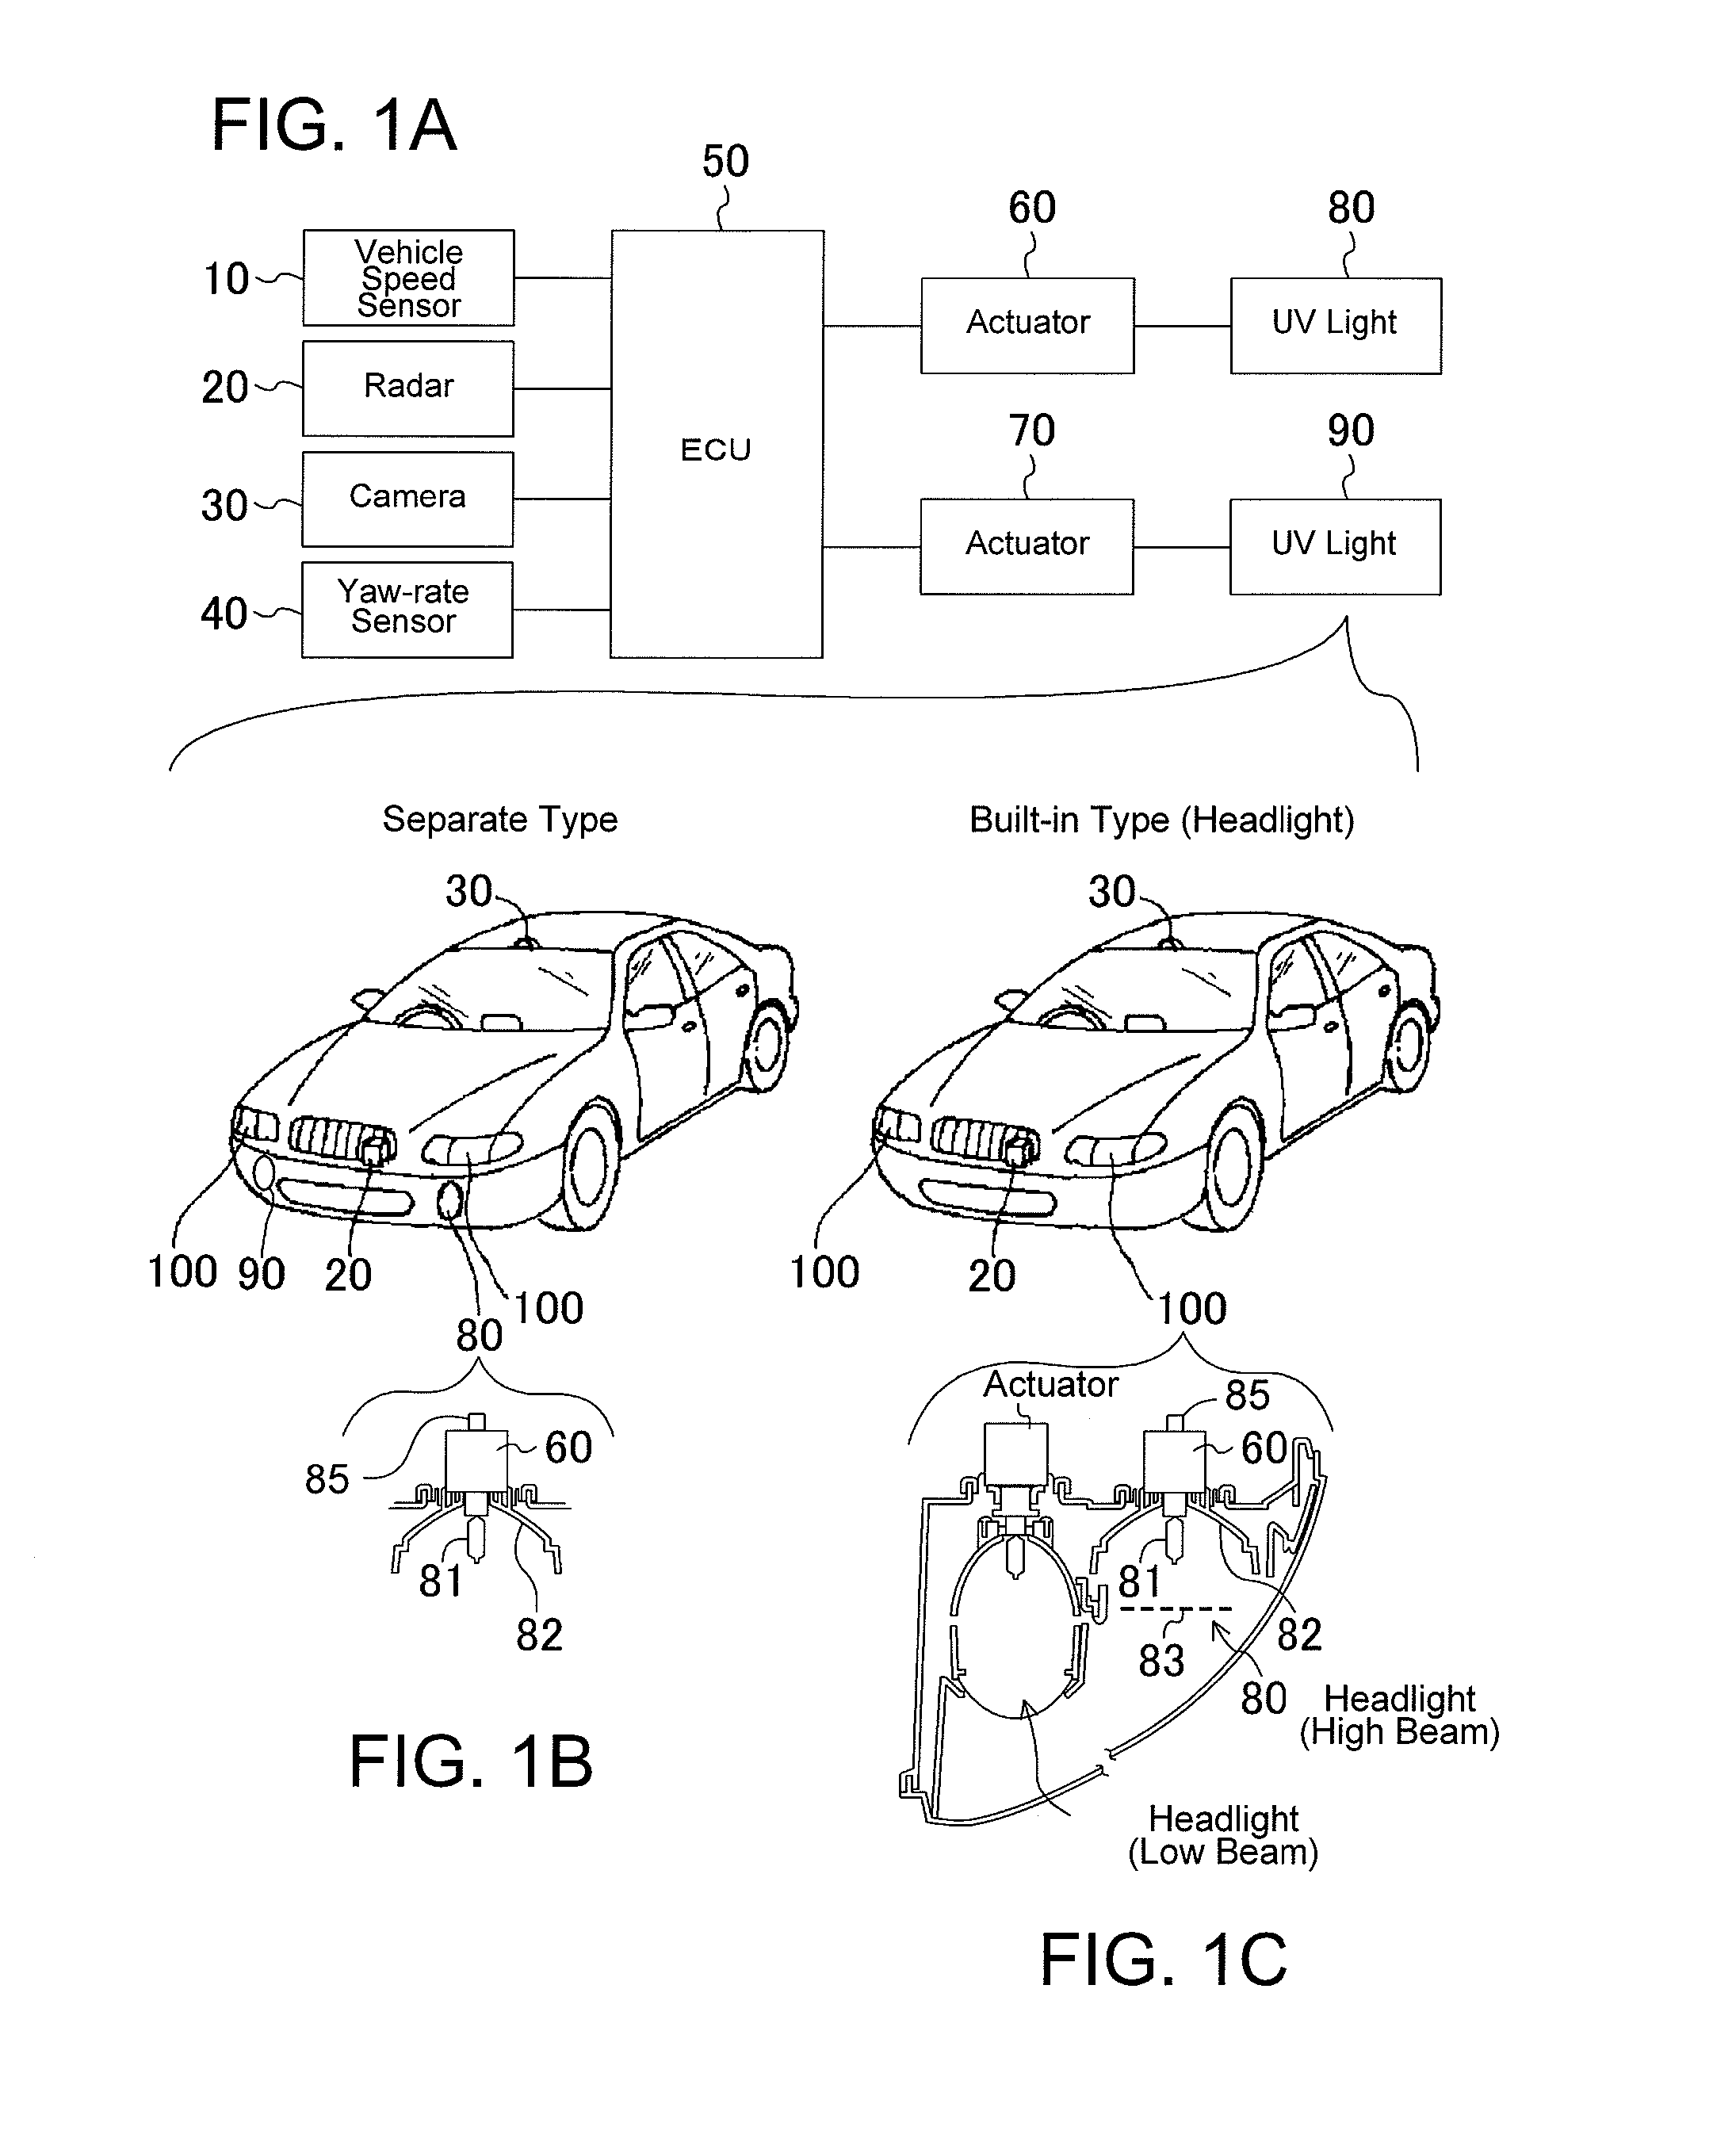 Vehicle Operation Support Method and System